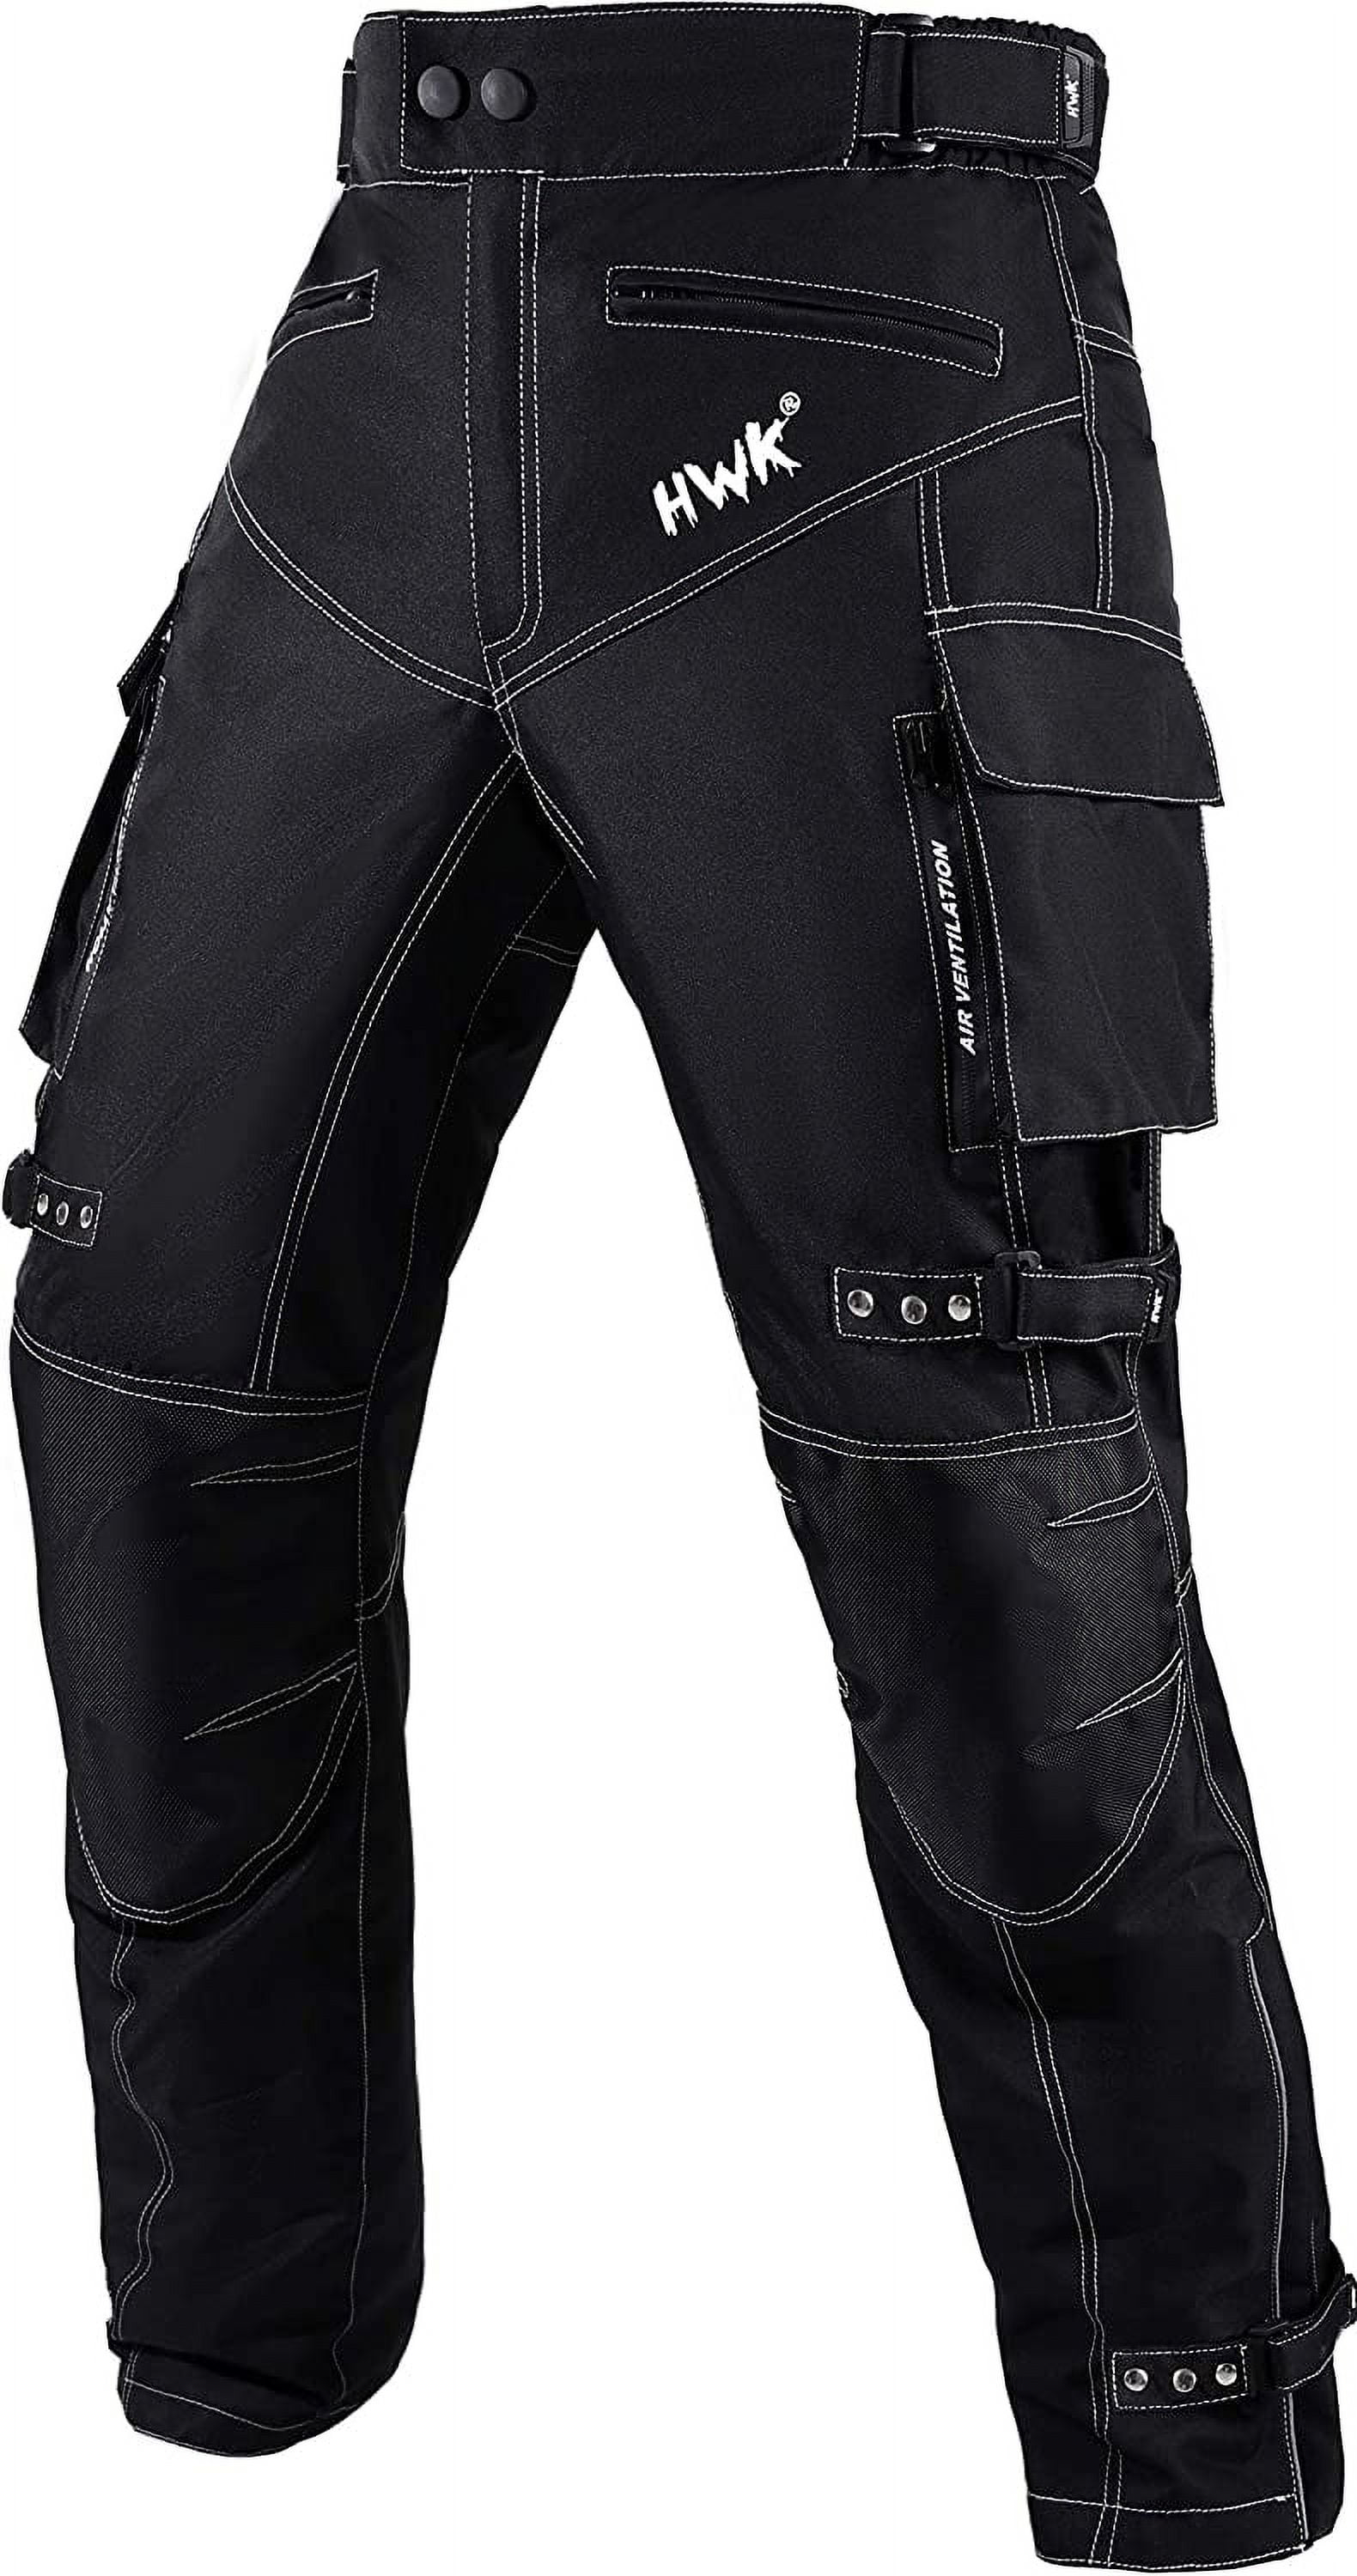 HWK Motorcycle Pants for Men and Women with Water Resistant Cordura Textile  Fabric for Enduro Motocross Motorbike Riding & Impact Armor, Dual Sport Motorcycle  Pants with 40-42 Waist, 34 Inseam 